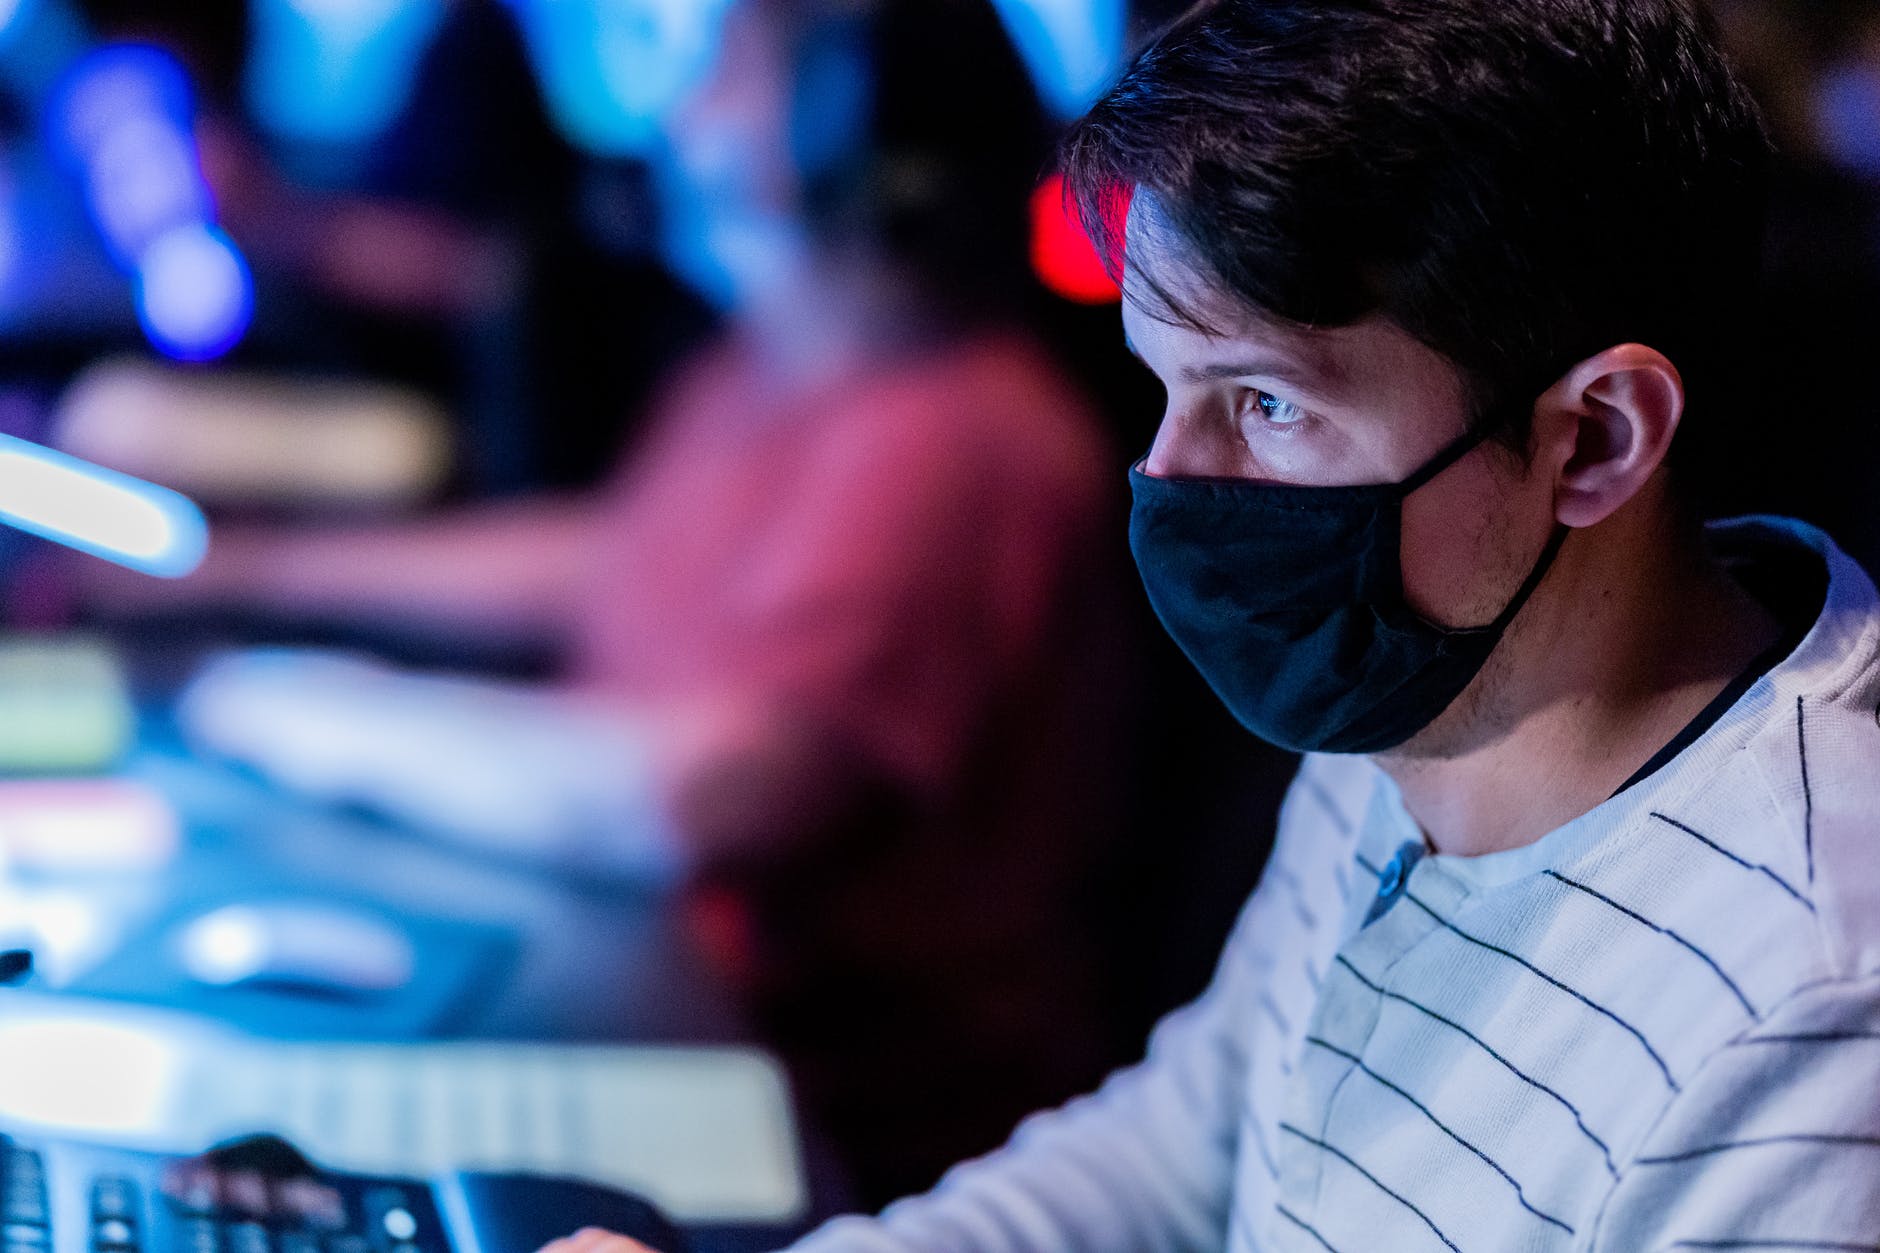 sound engineer in textile mask against mixing console